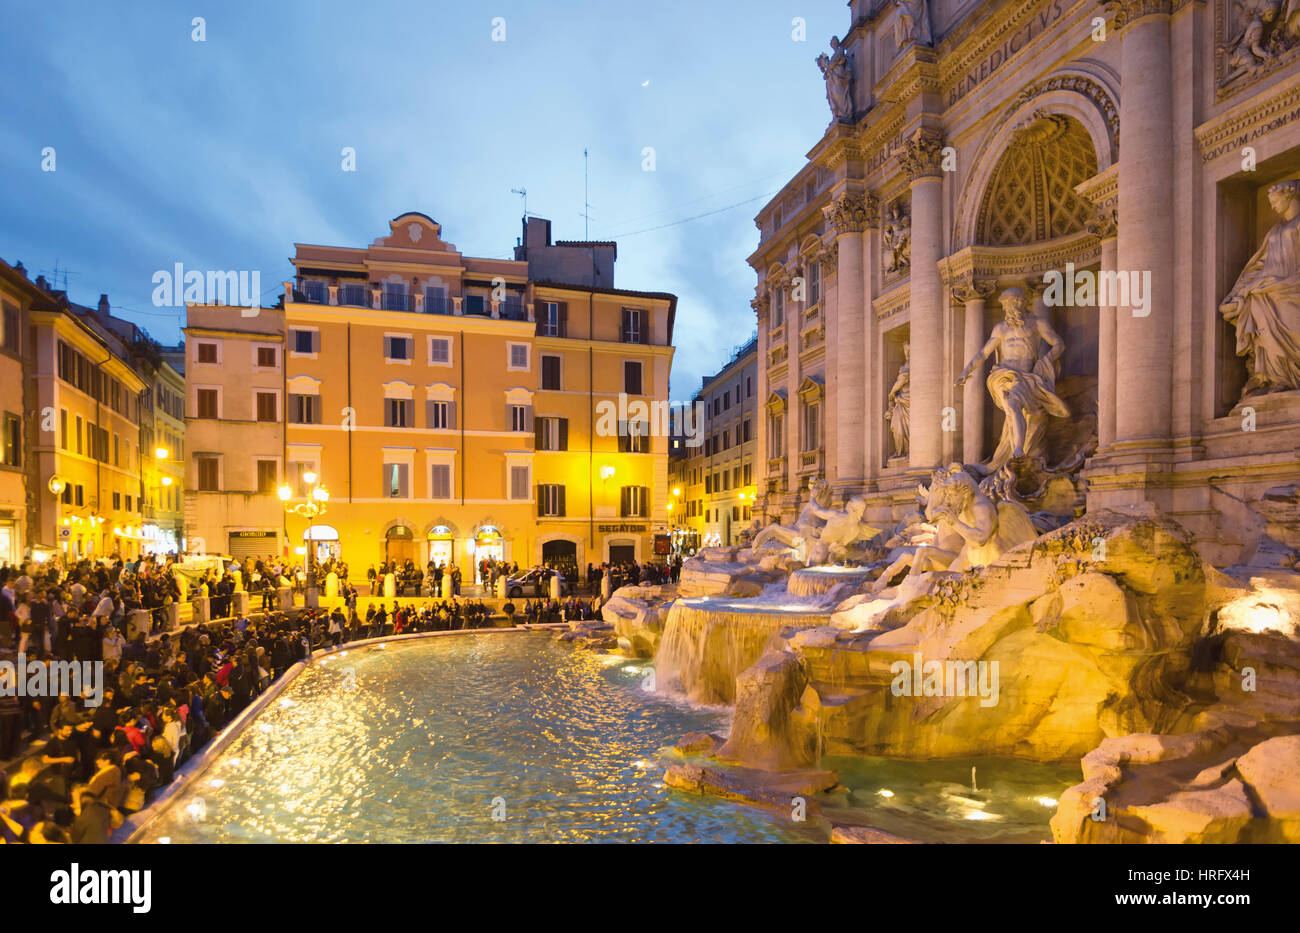 Rome, Italy. The 18th century Baroque Trevi Fountain designed by Nicola Salvi.  The  Historic Centre of Rome is a UNESCO World Heritage Site. Stock Photo